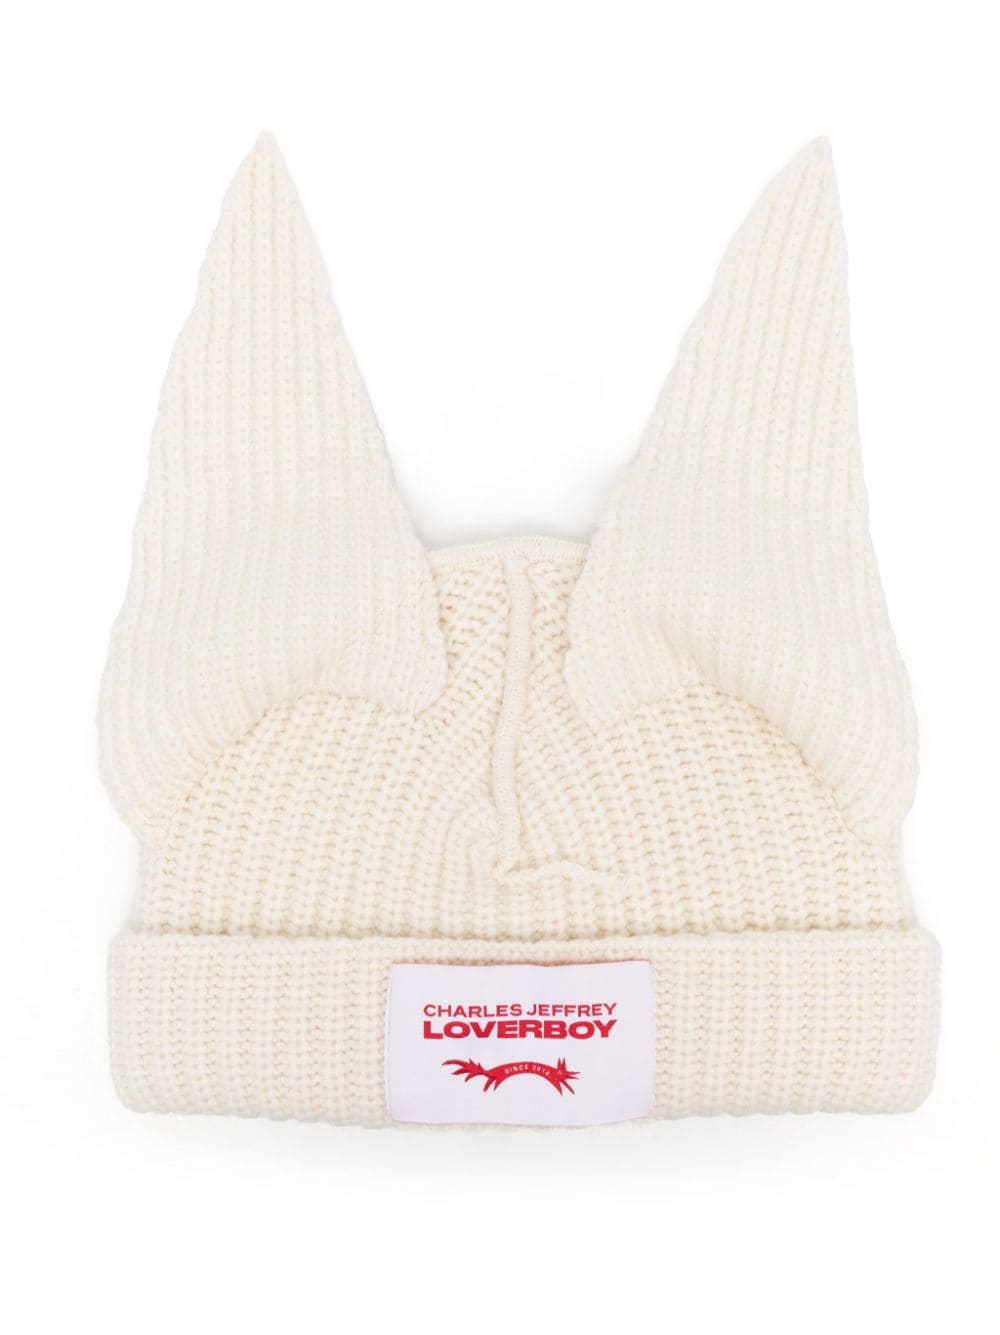 Charles Jeffrey Loverboy animal-ears knitted beanie - Neutrals von Charles Jeffrey Loverboy